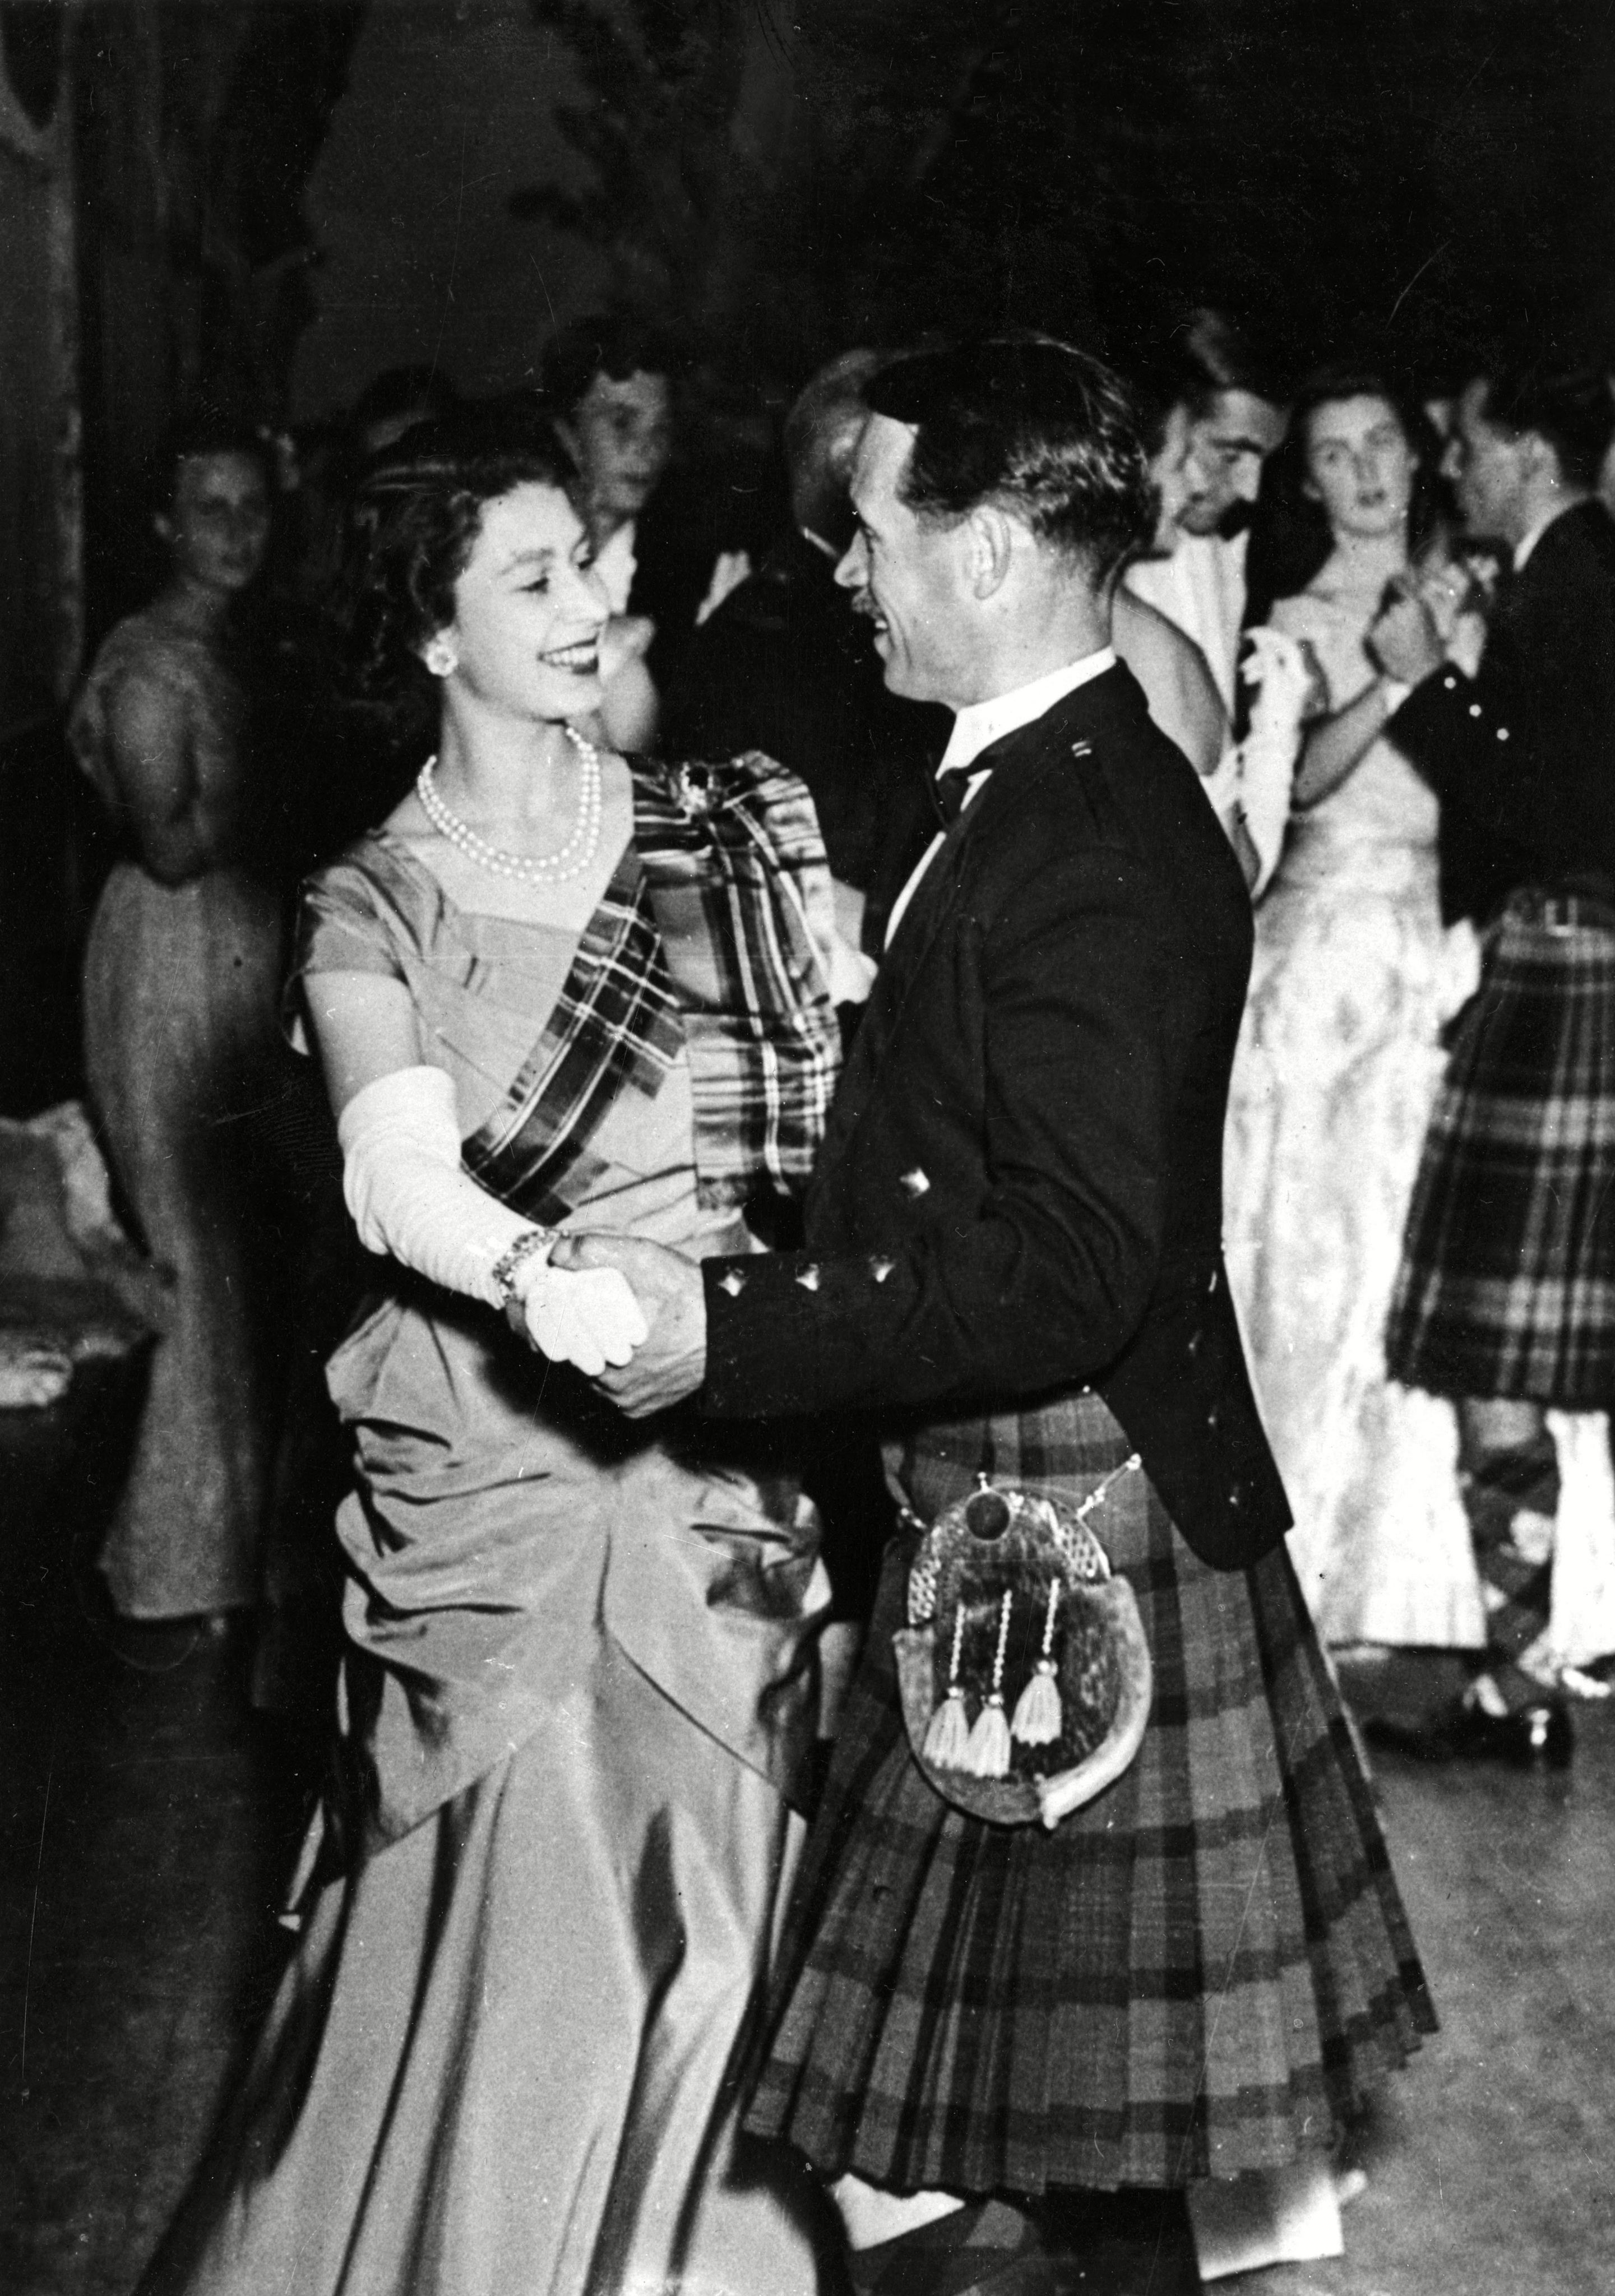 <p>Princess Elizabeth wore a lime green gown with a Royal Stewart tartan sash as she danced the quick-step with Mr. David Bogle at the Aboyne Ball in the Victory Hall Aboyne in Aberdeenshire, Scotland, in November 1949.</p>